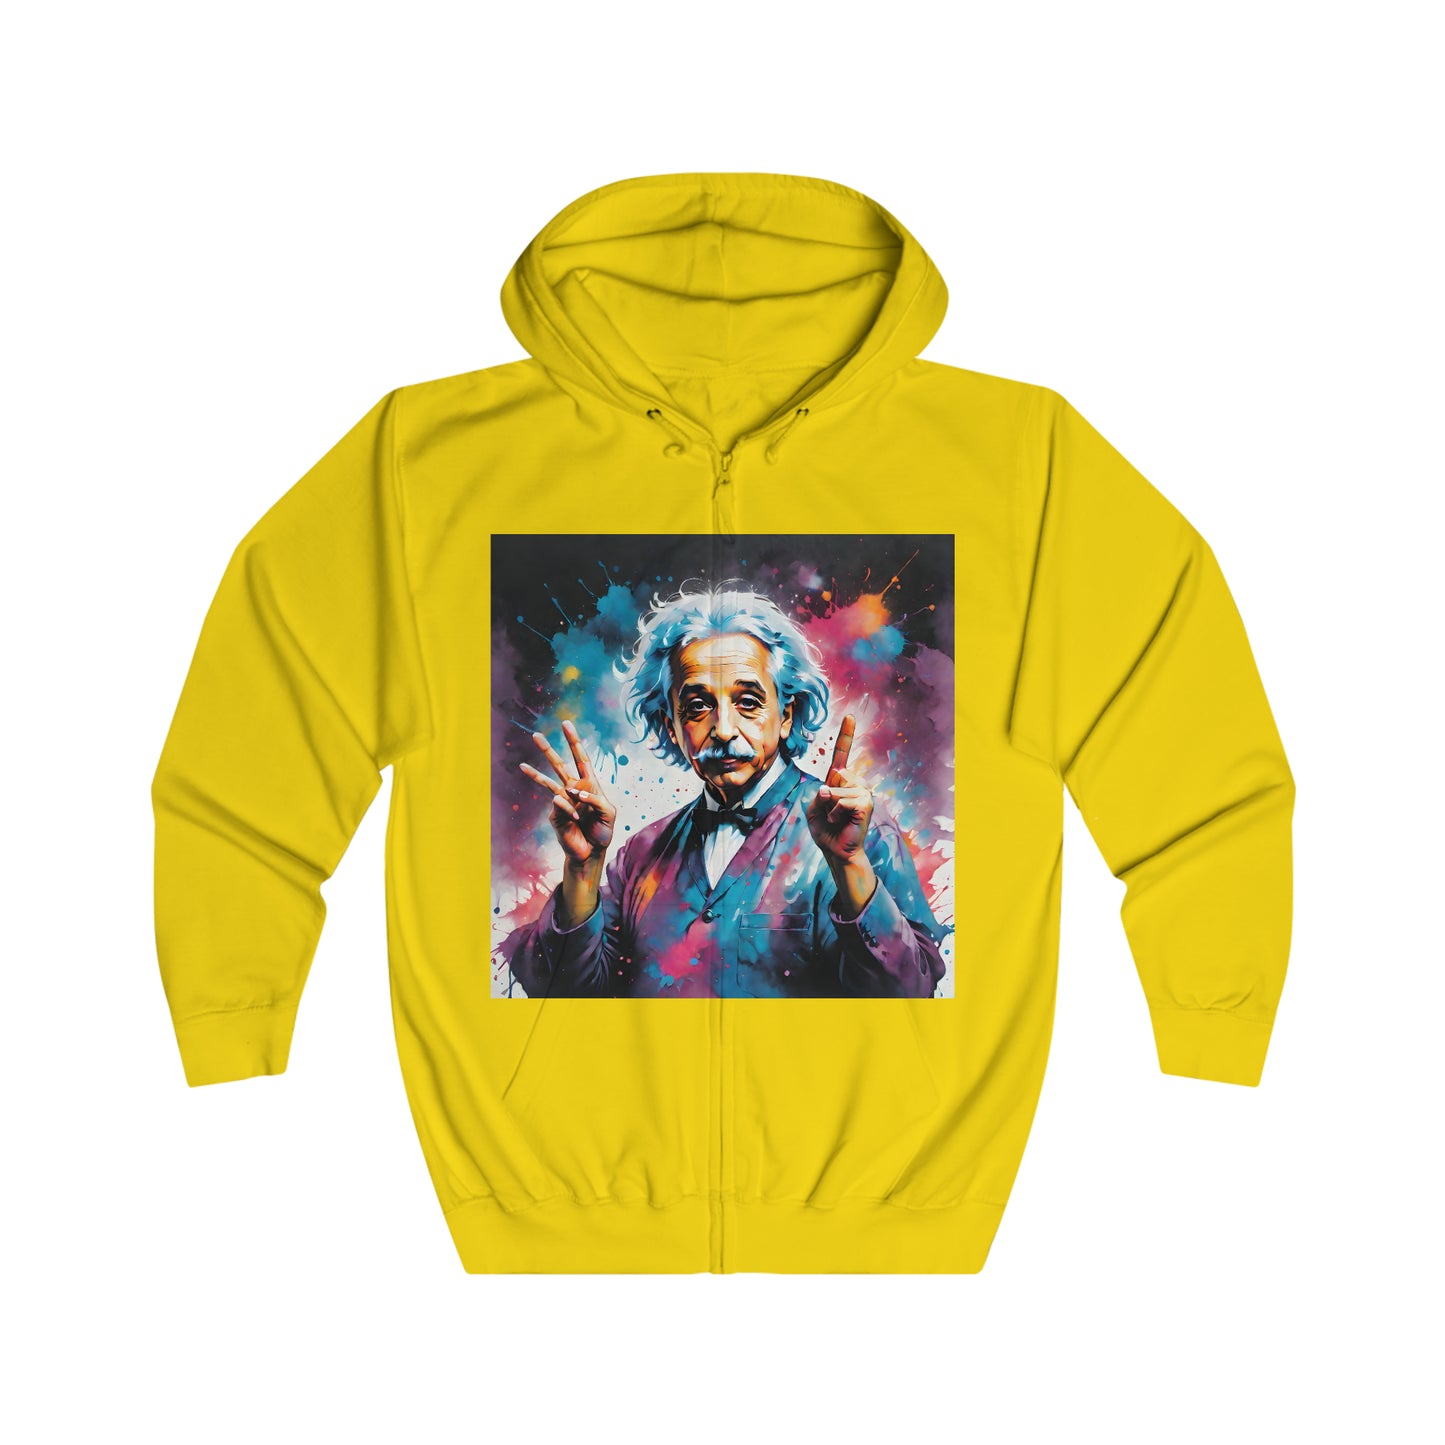 "The theory of everything" Single Print Unisex Full Zip Hoodie